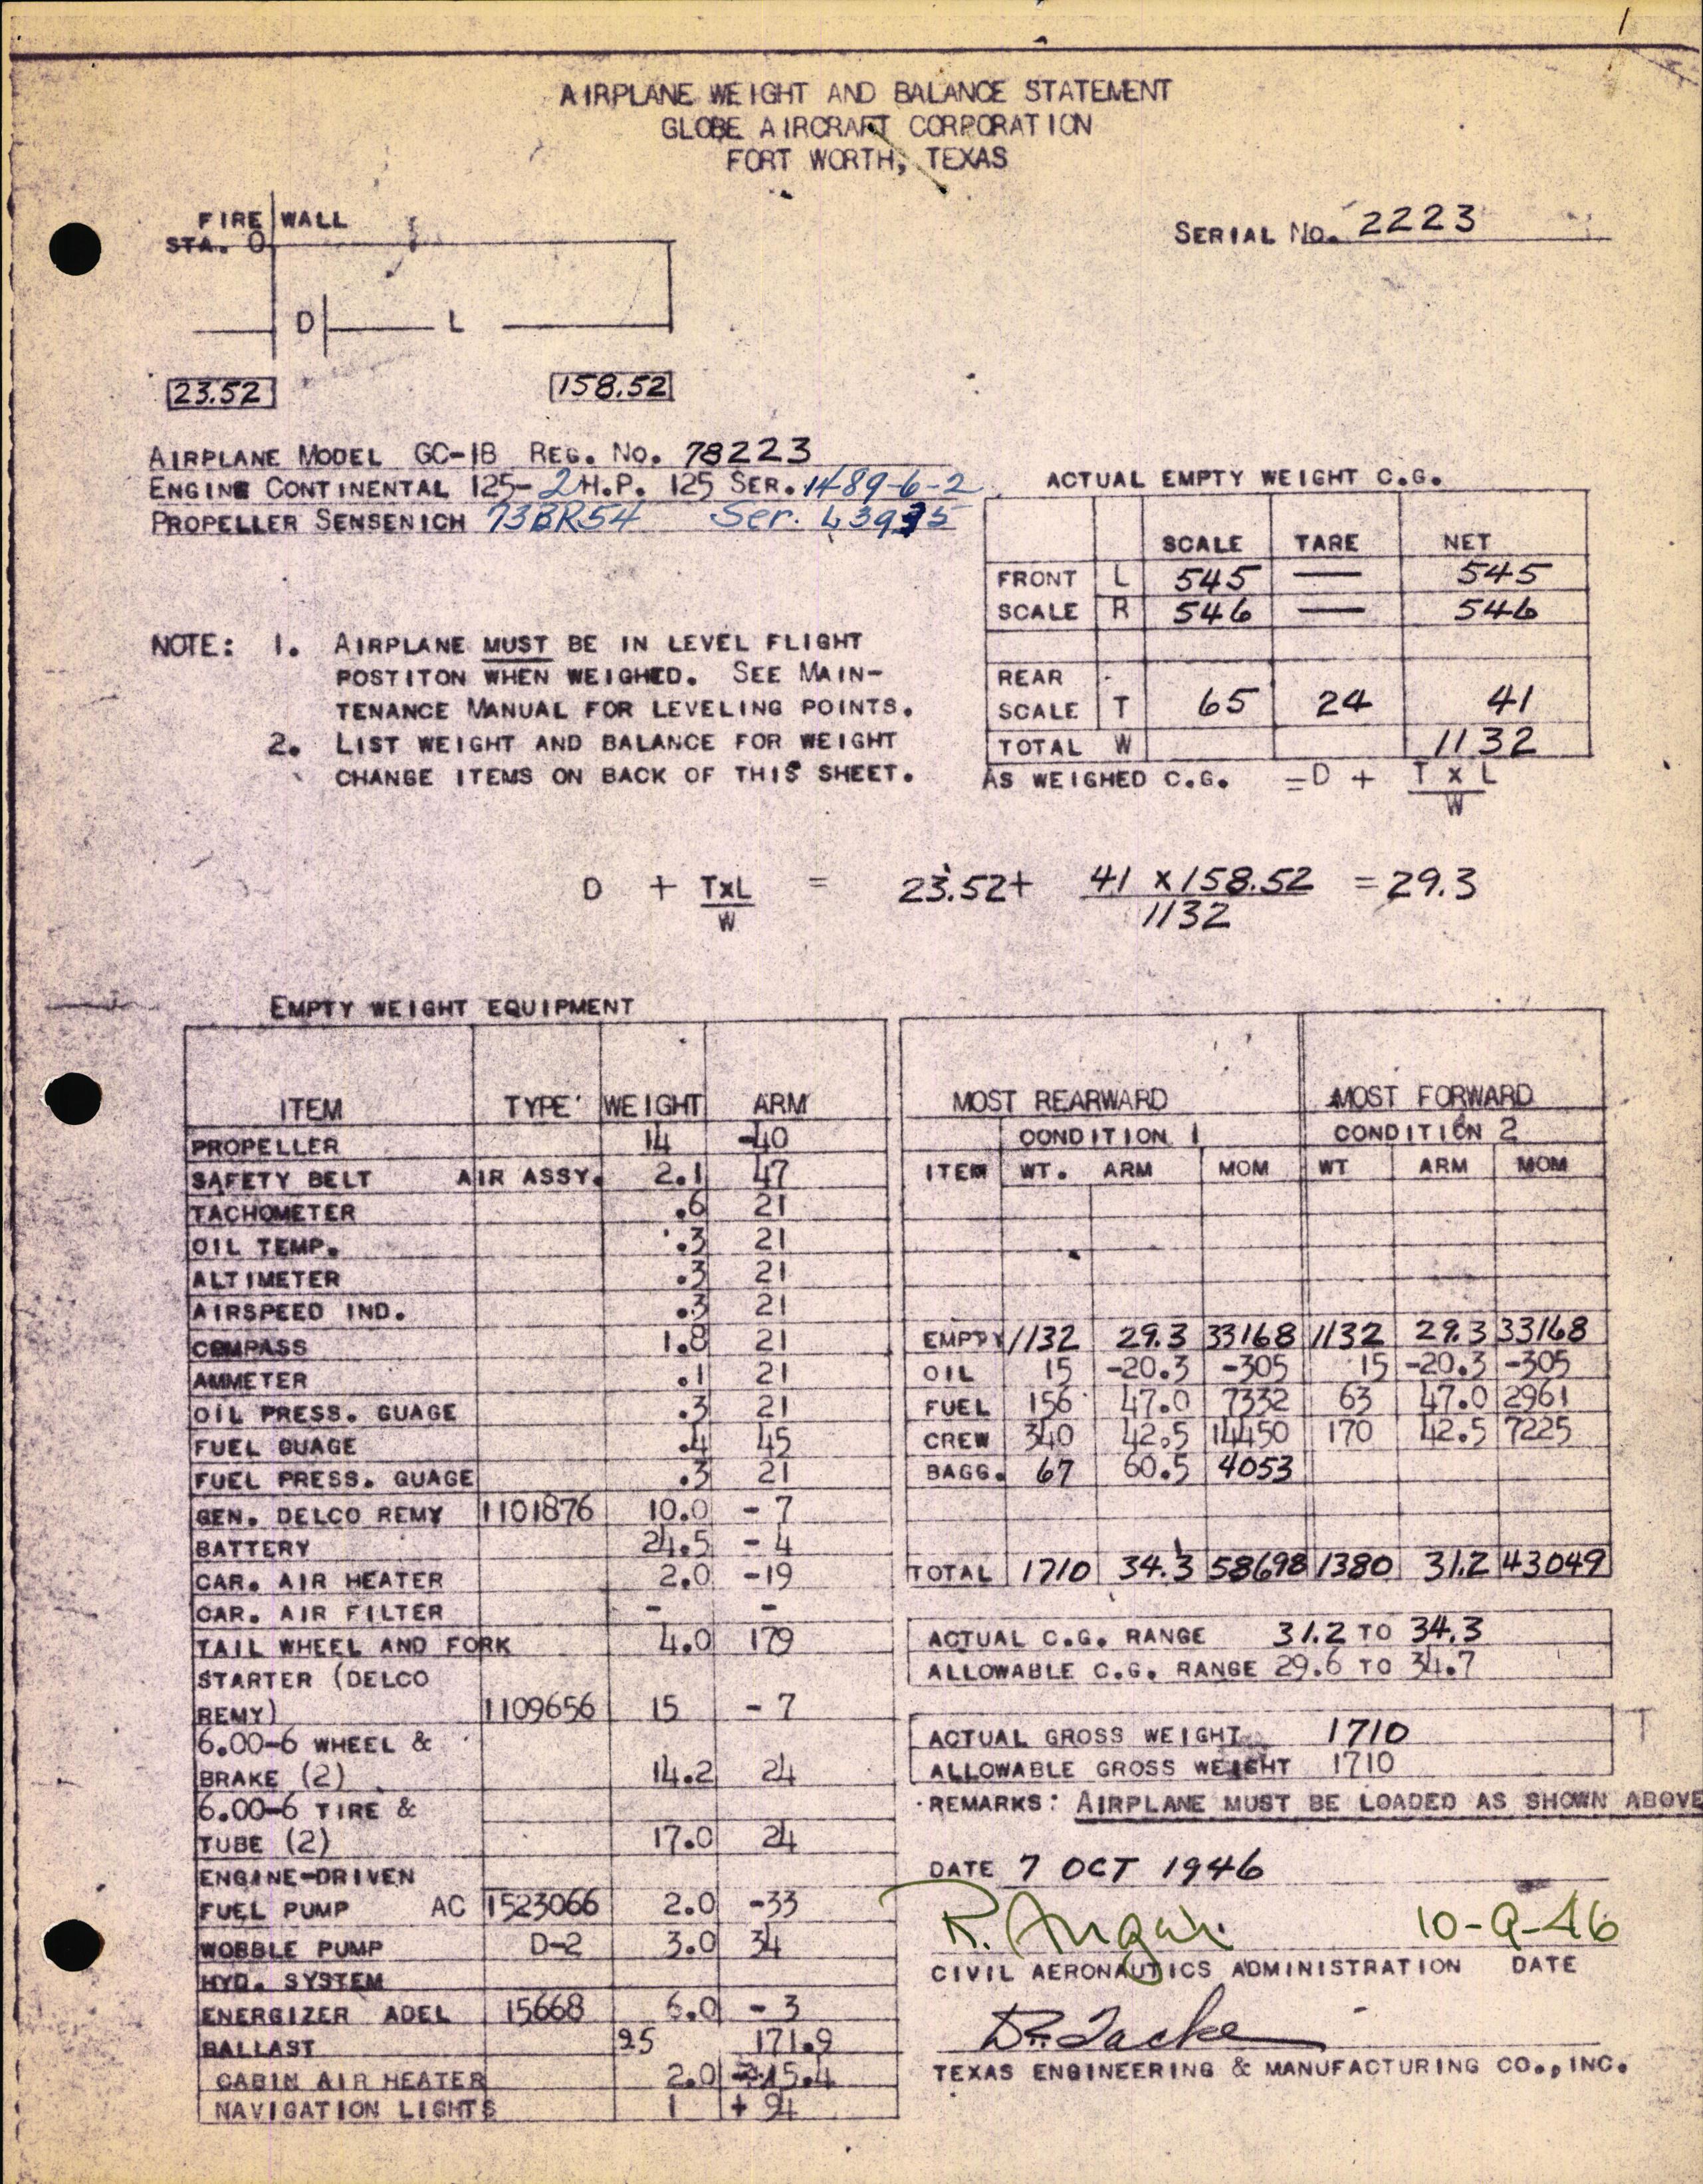 Sample page 1 from AirCorps Library document: Technical Information for Serial Number 2223